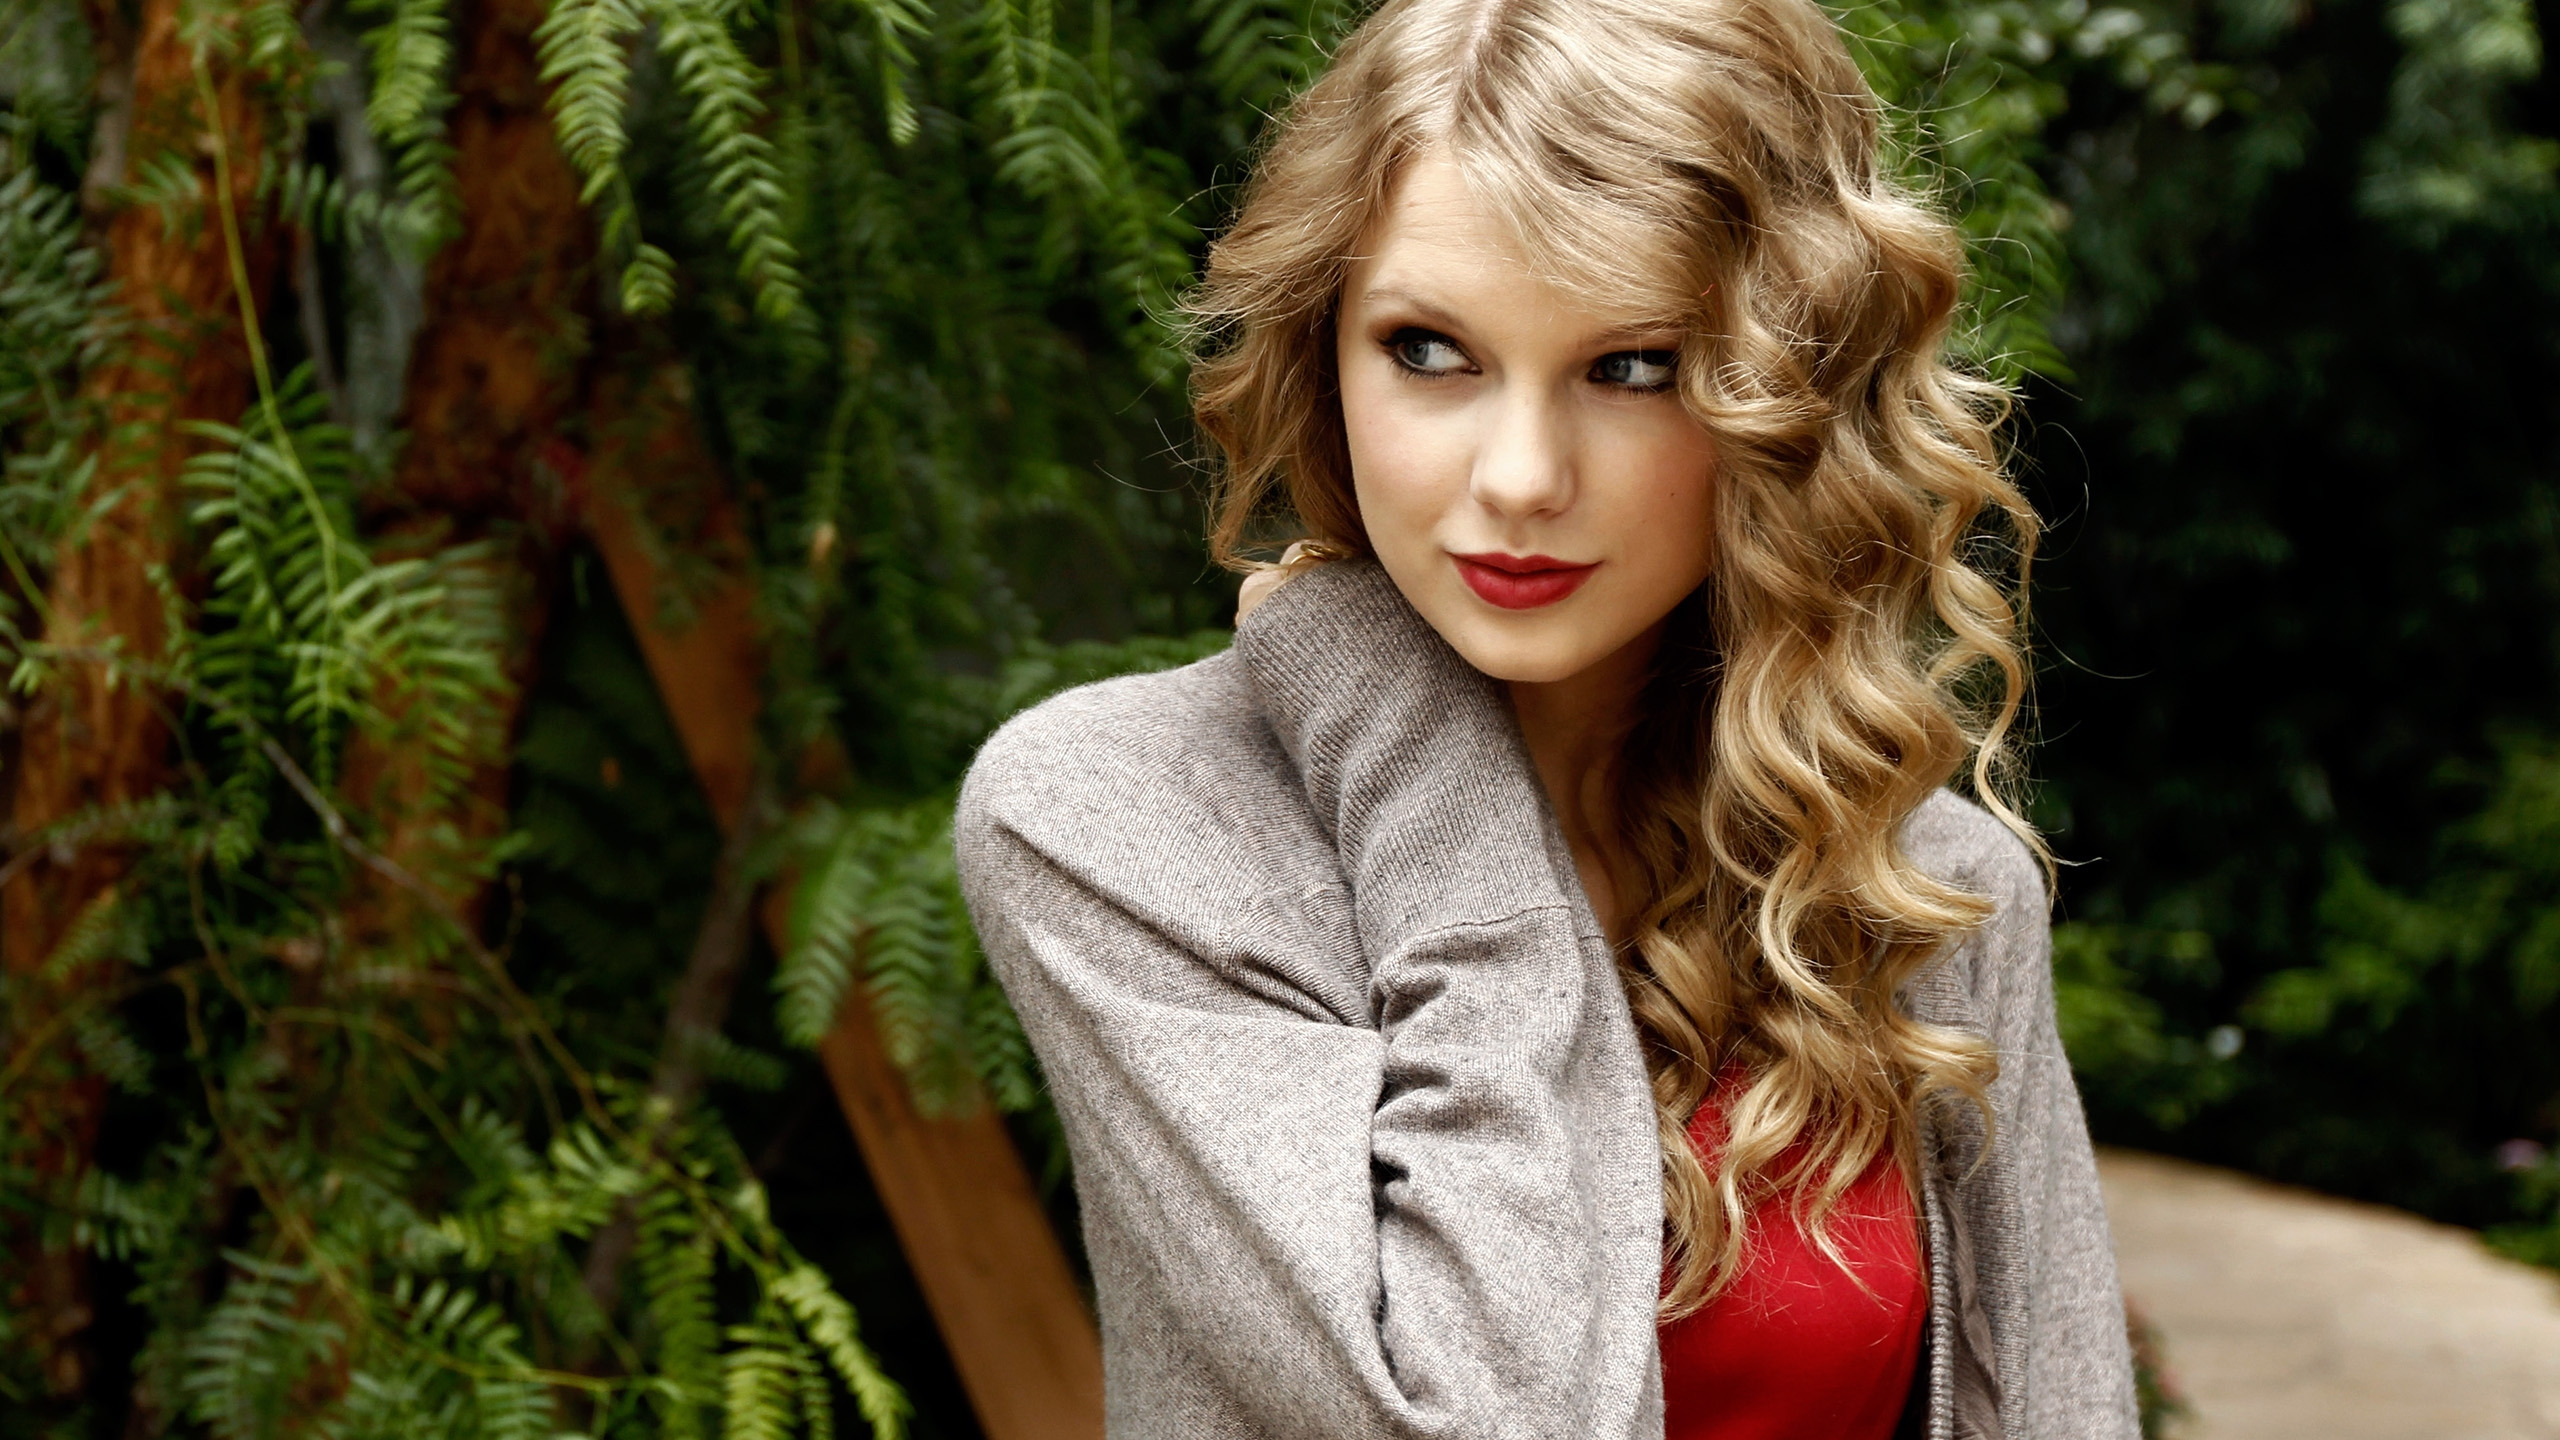 Smiling Taylor Swift Actress for 2560x1440 HDTV resolution